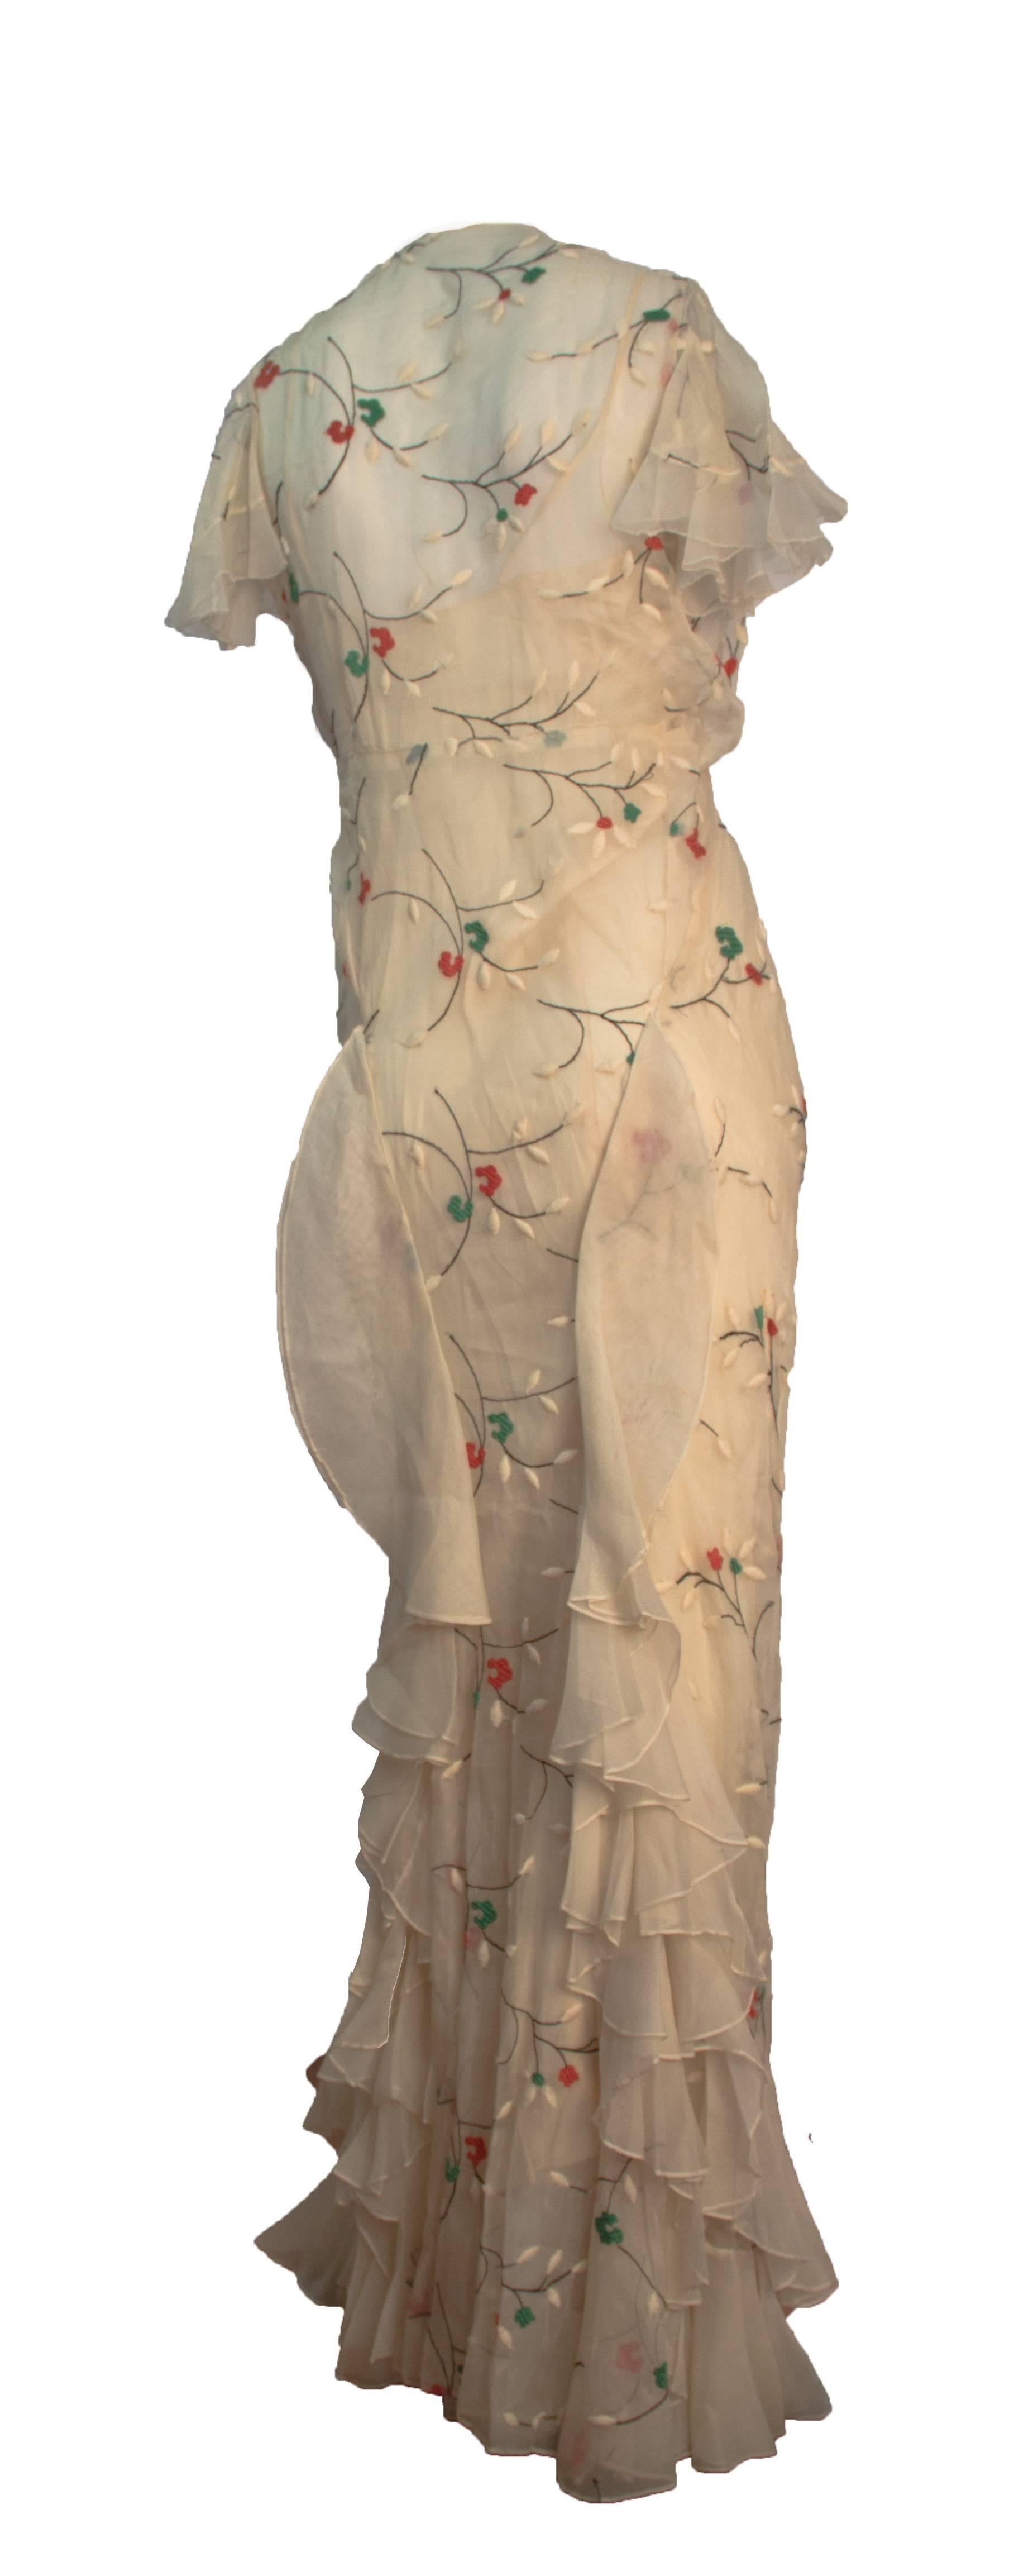 Beige 30s Cream Bias Cut Dress with Floral Embroidery and Slip